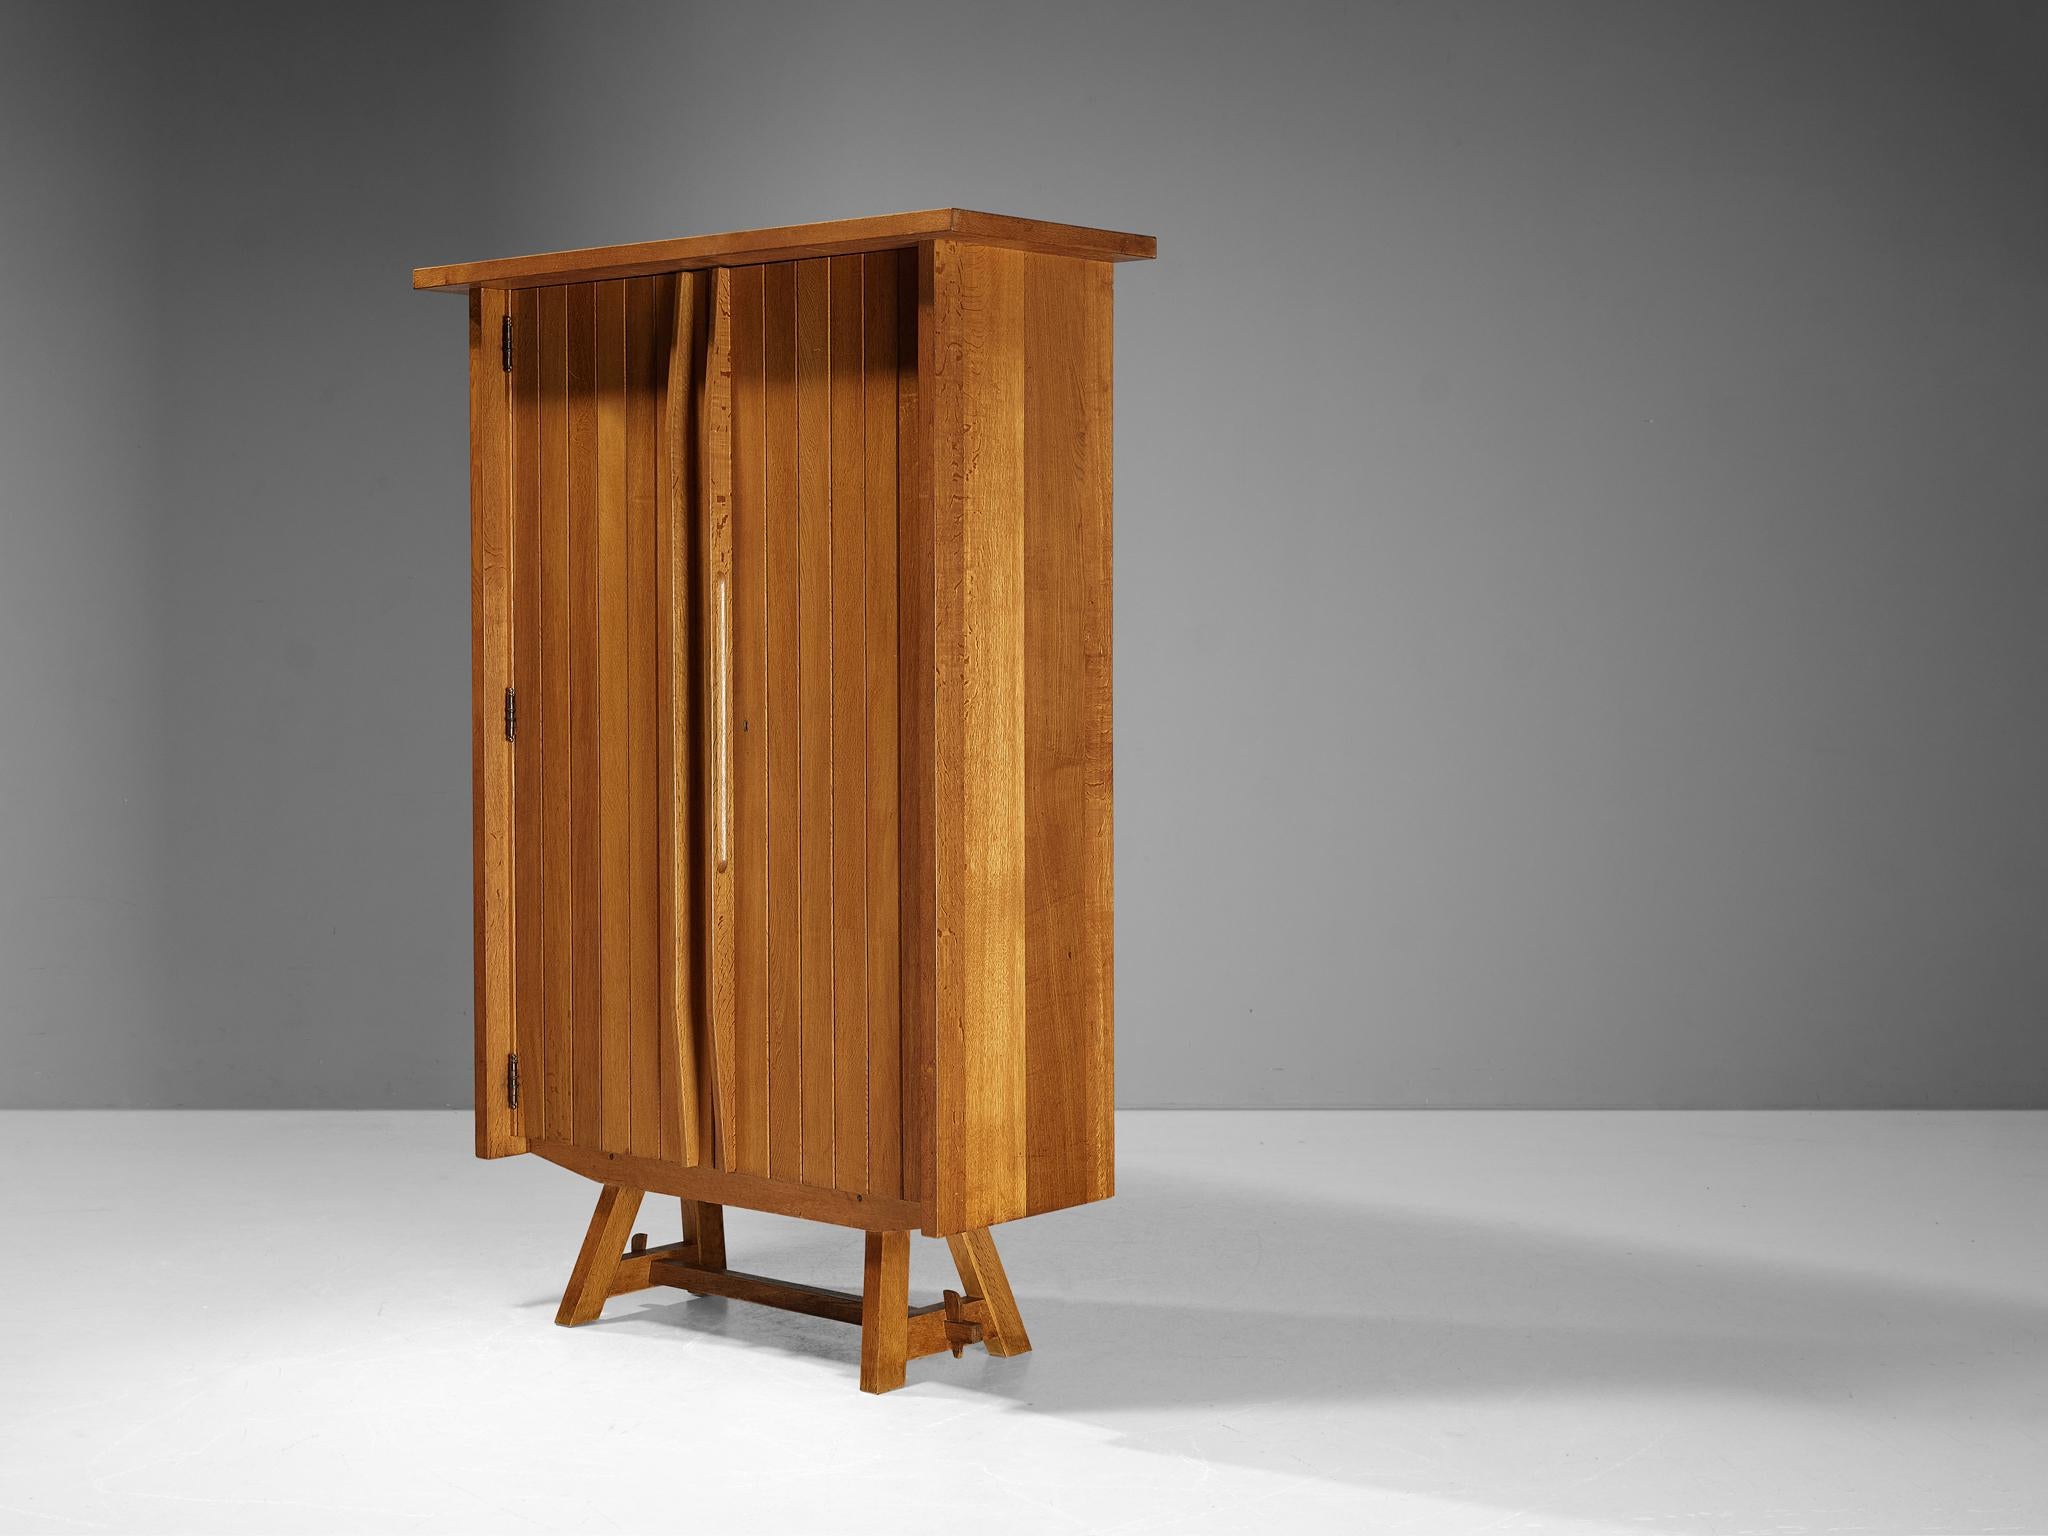 Wardrobe, oak, France, 1960s

A beautiful French tall cabinet made in expressive oak and displaying a stunning design. This elegant armoire has a considerable size which provides great storage space. The door panels are composed of carved vertical